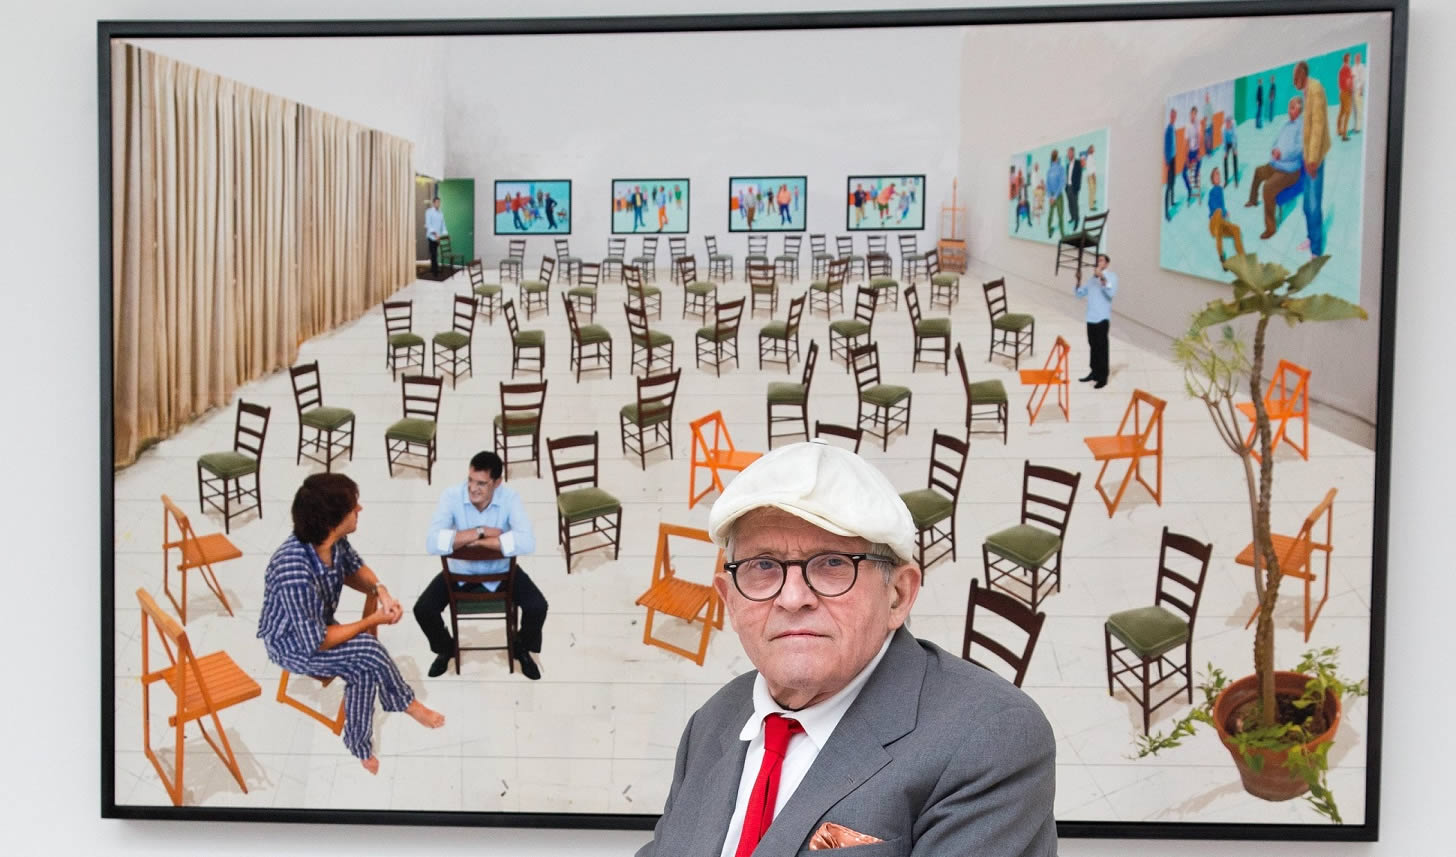 Image name david hockney credit tommy london alamy stock photo header the 11 image from the post David Hockney at 80 in Yorkshire.com.